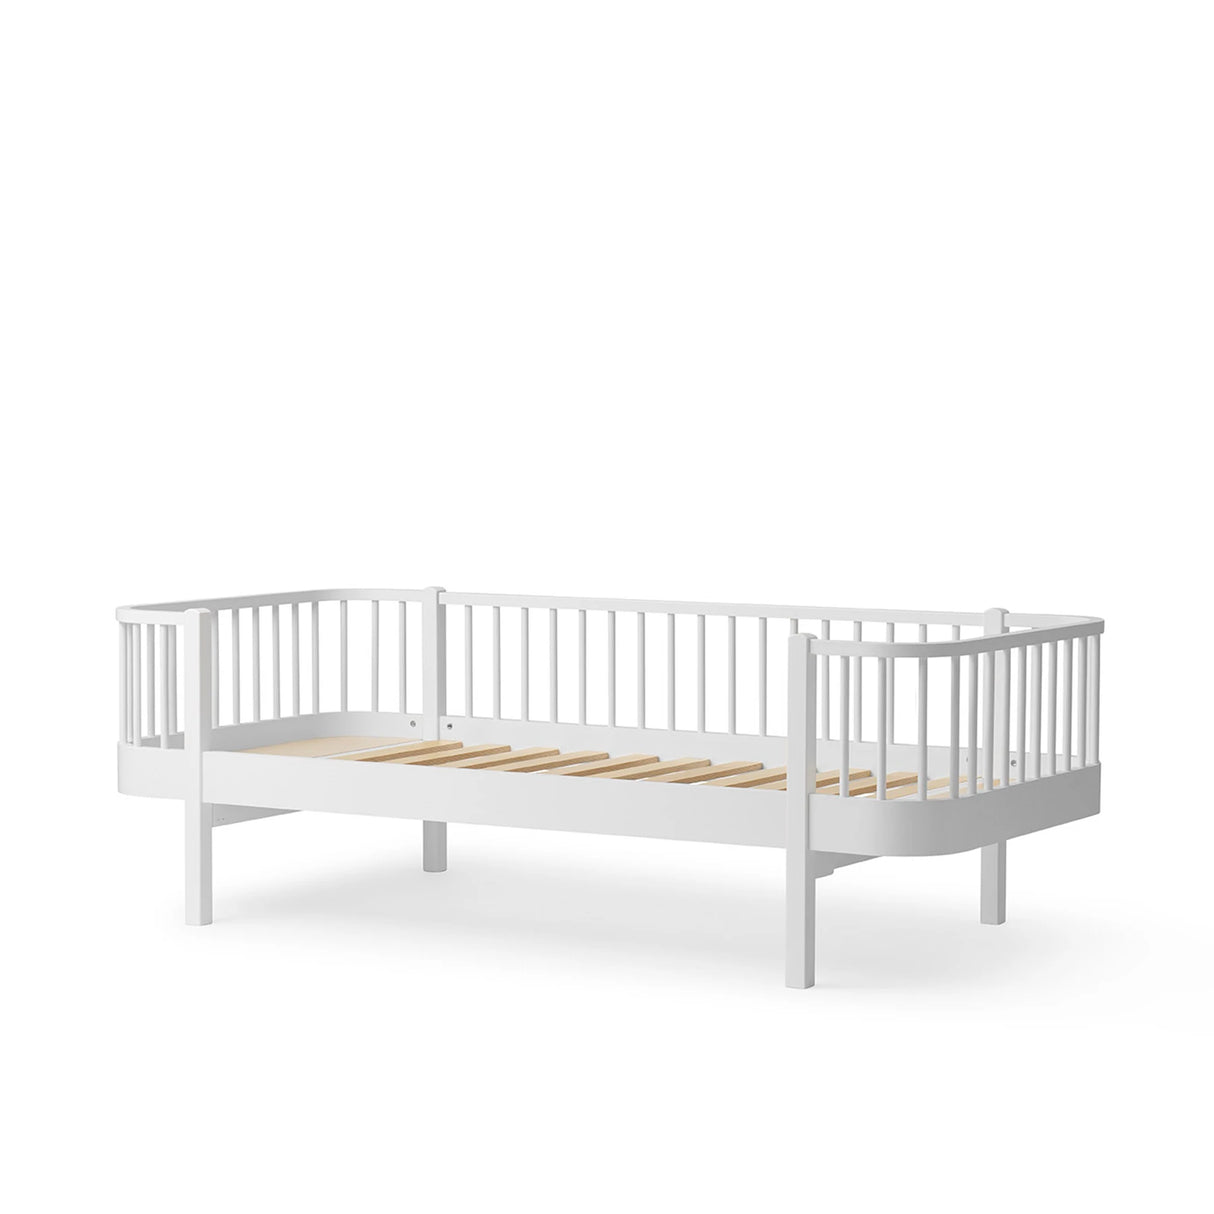 FREE Installation - Oliver Furniture Wood Original Day Bed in White - Little Snoozes